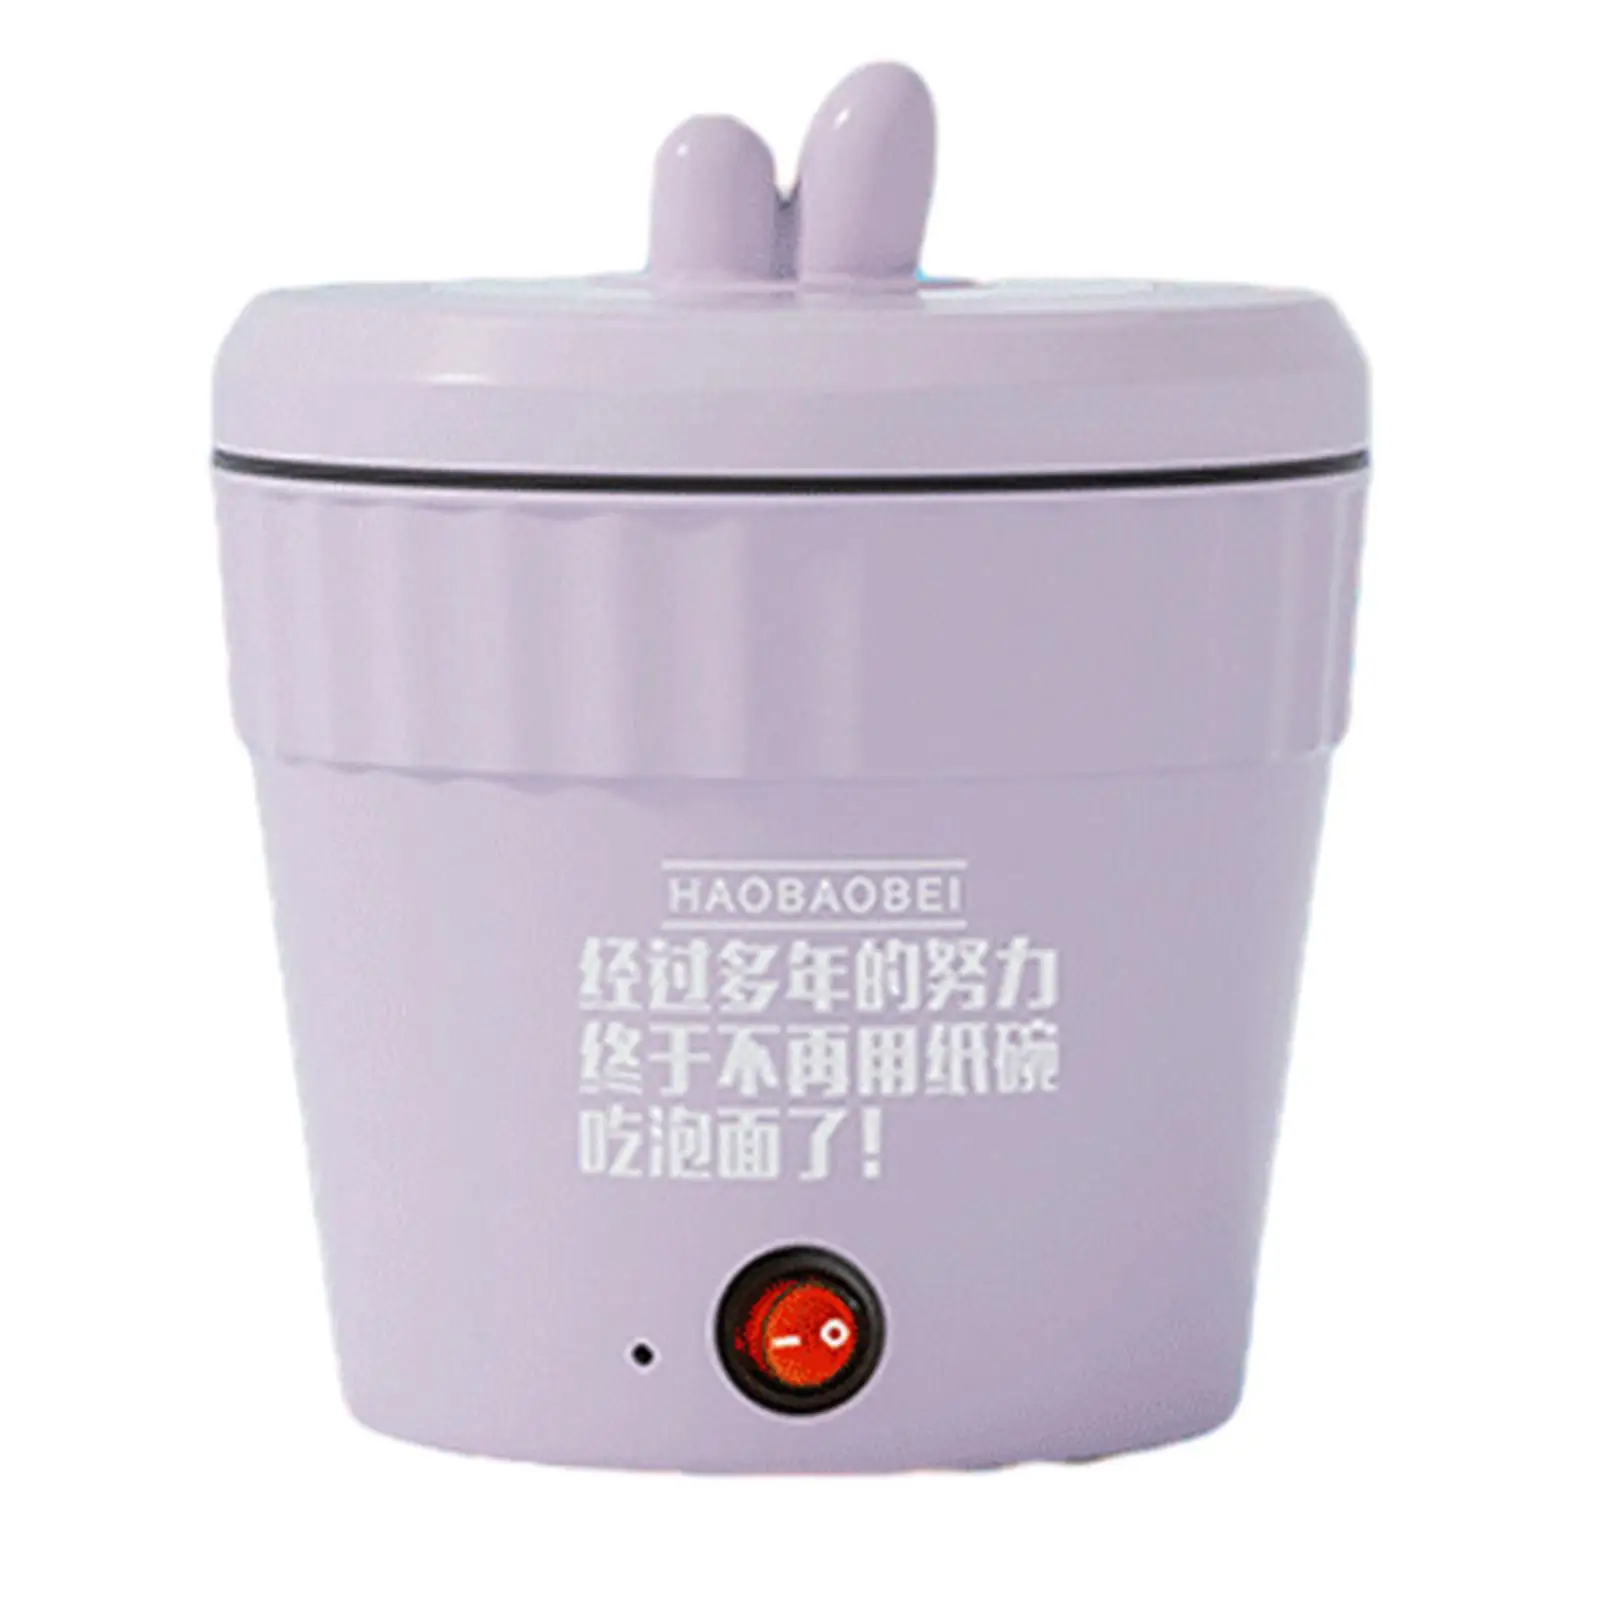 Mini Hot Pot Nonstick Portable Visible Lid Soup Steamer Multipurpose Electric Rice Cooker for Pasta Steak Oatmeal Fried Rice Egg